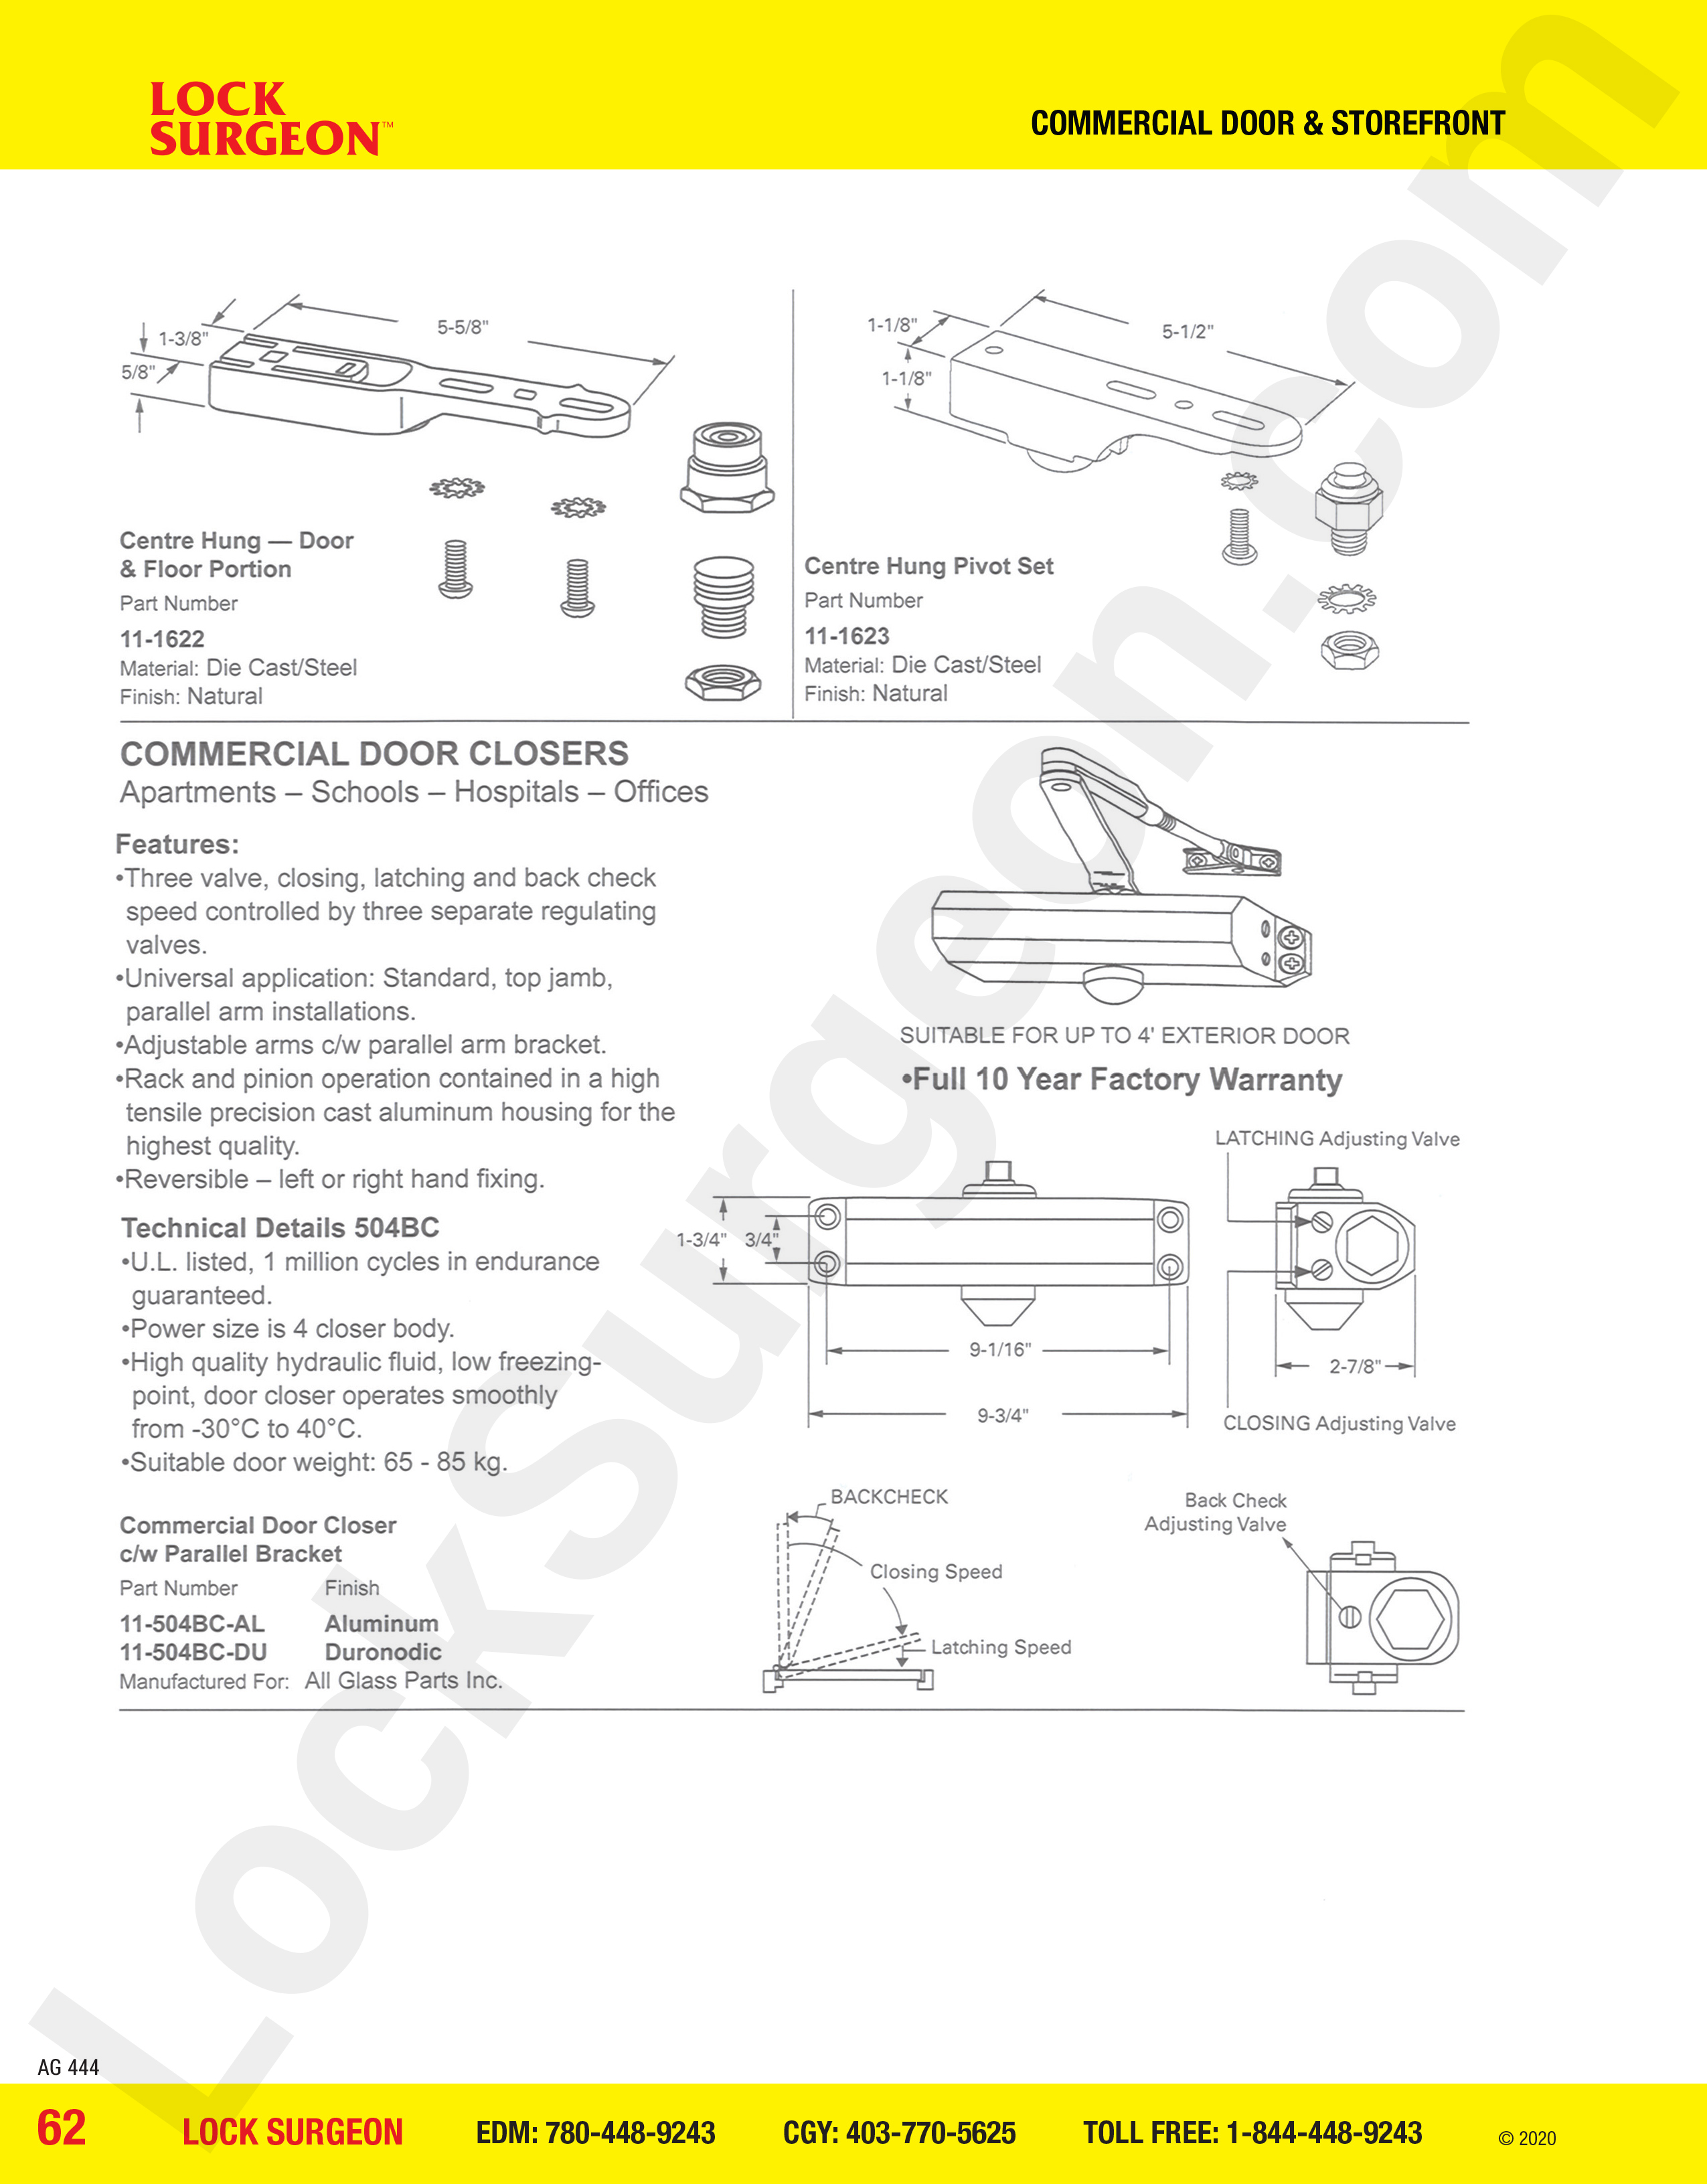 Commercial Door and Storefront parts for commercial door closer Acheson